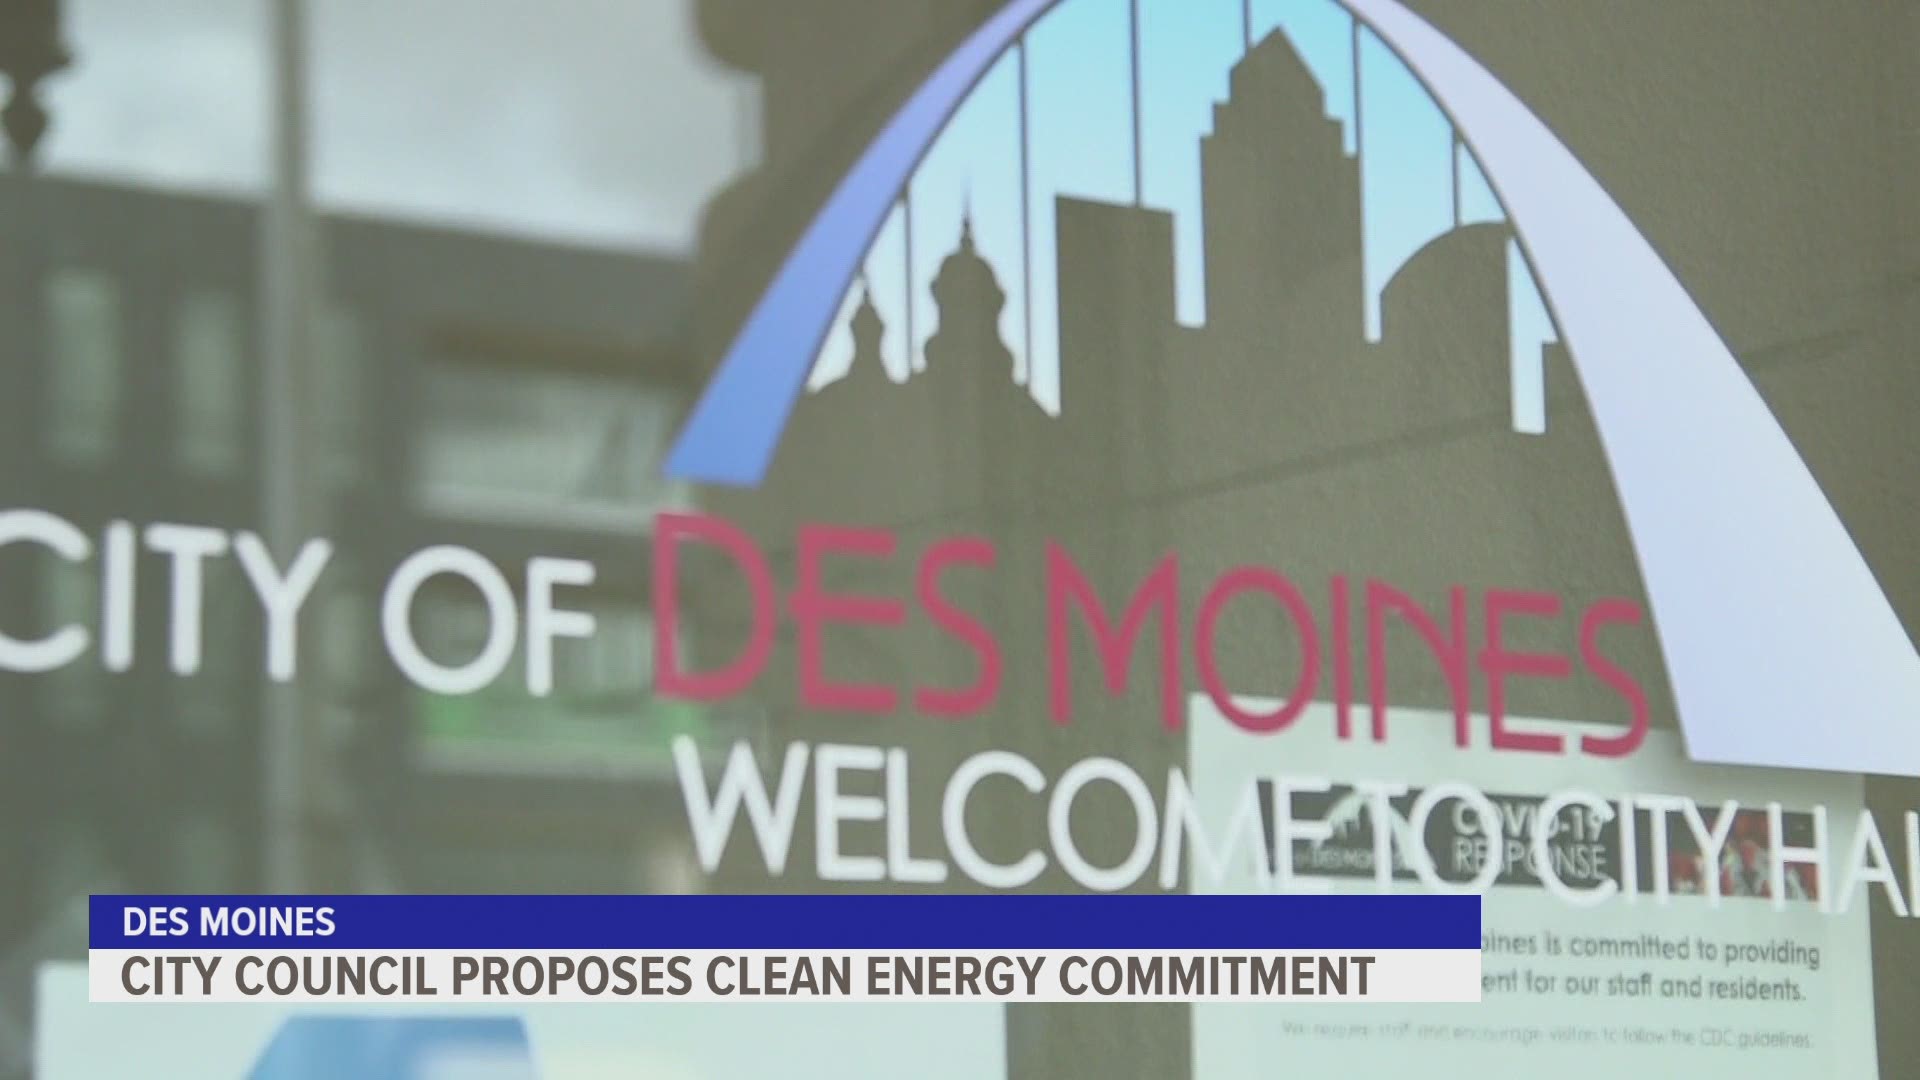 City Council introduced a resloution Monday that could have the City join more than 160 other cities nationwide that have already committed to clean energy.